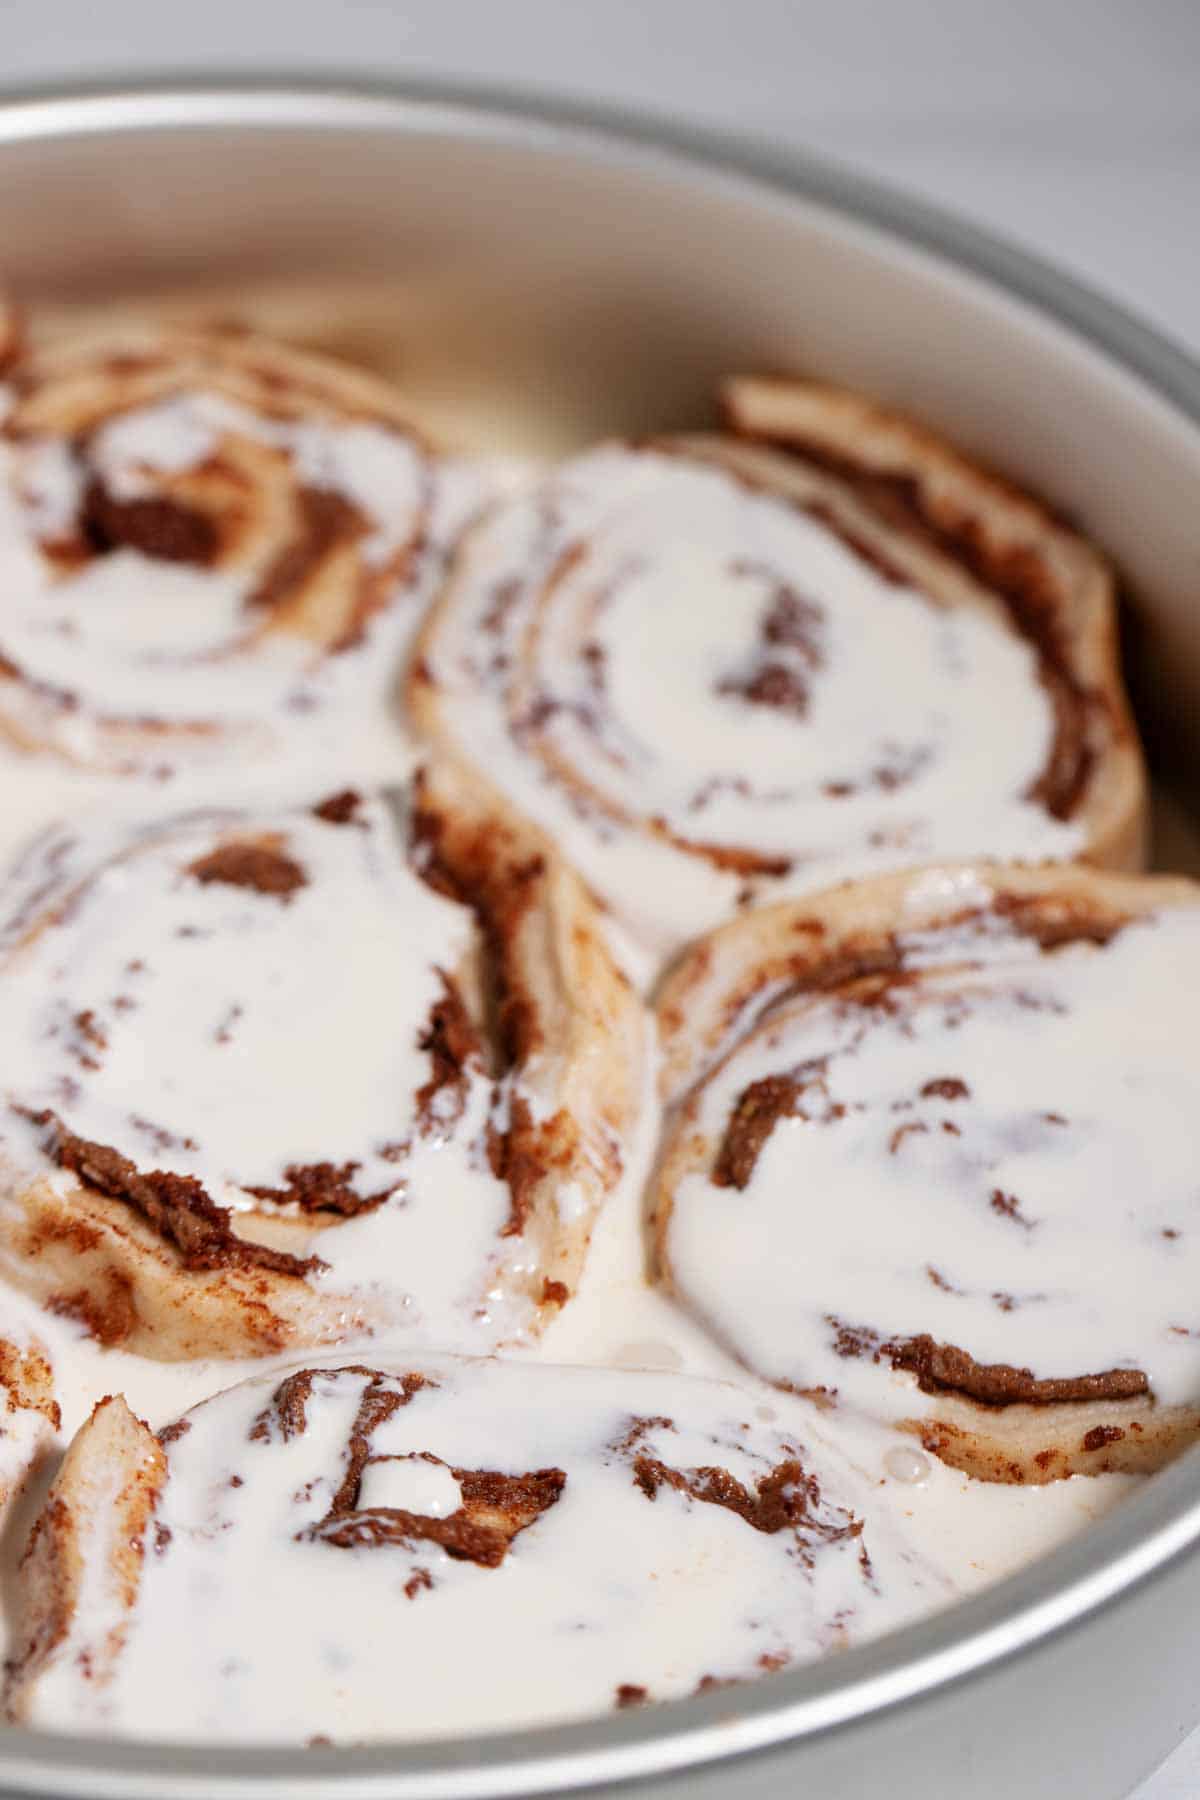 Pan of unbaked canned cinnamon rolls drenched in cream.